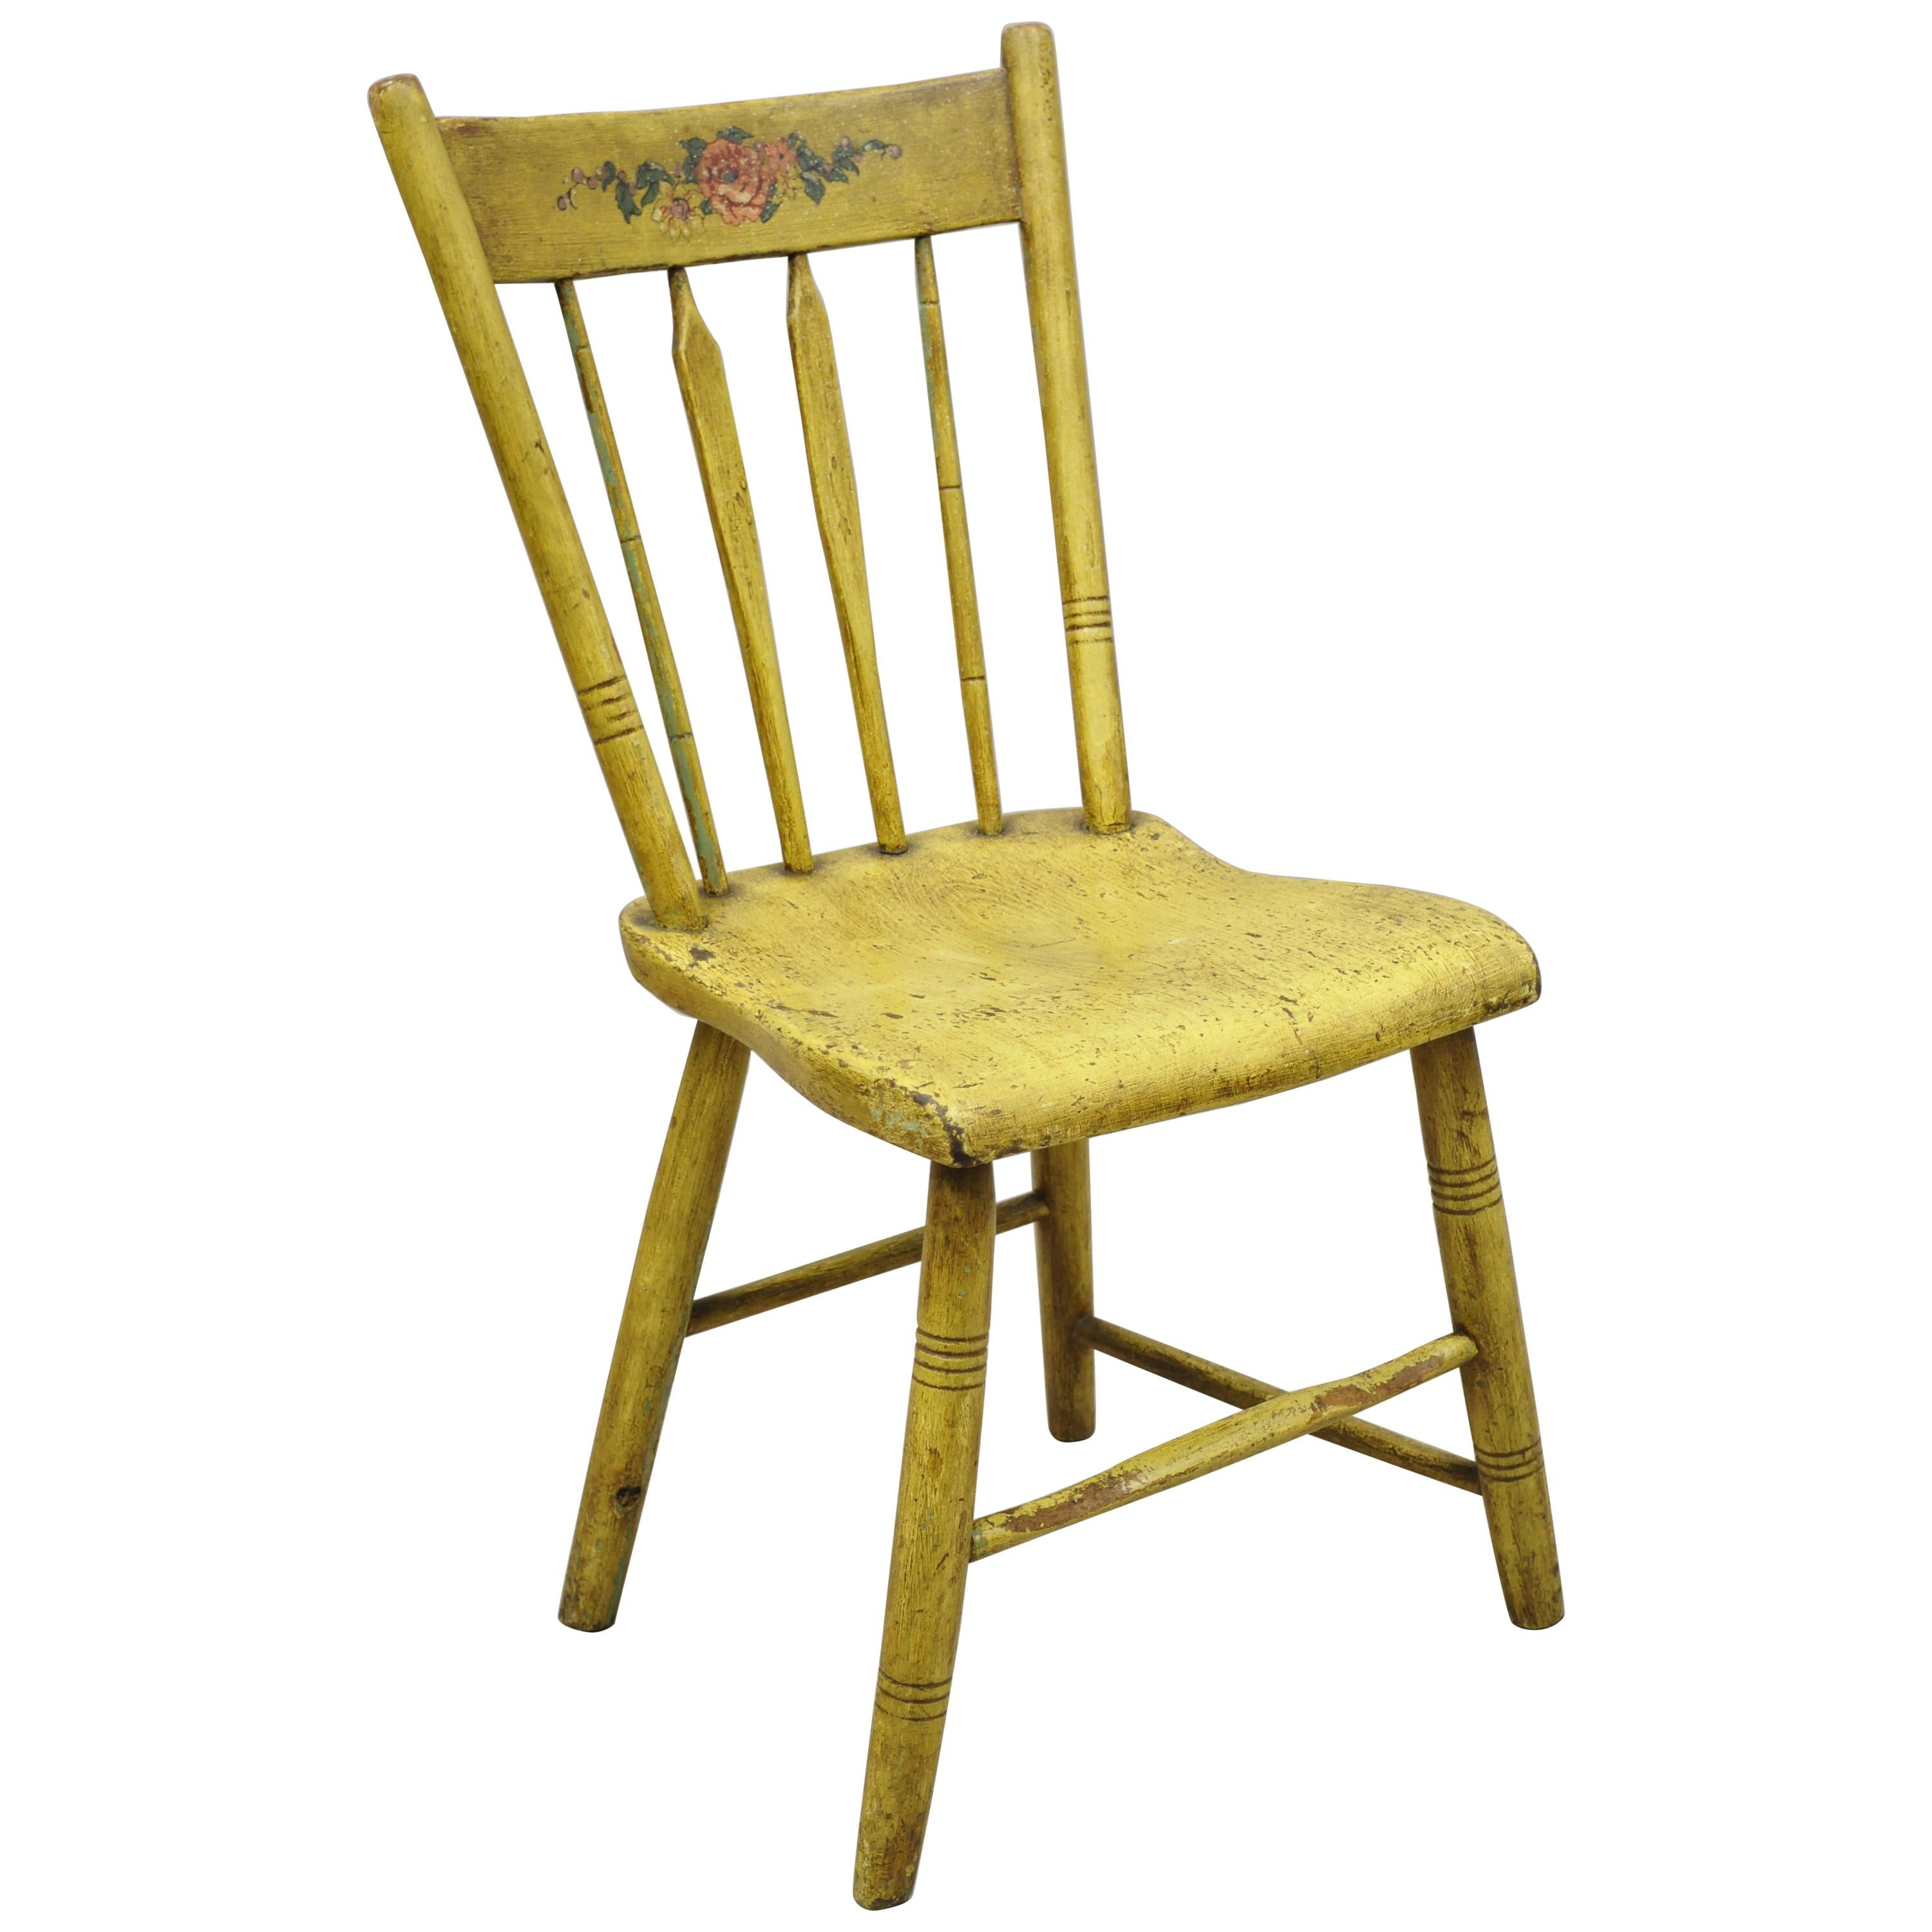 Frederick Loeser & Co Yellow American Primitive Hitchcock Painted Side Chair 'B'